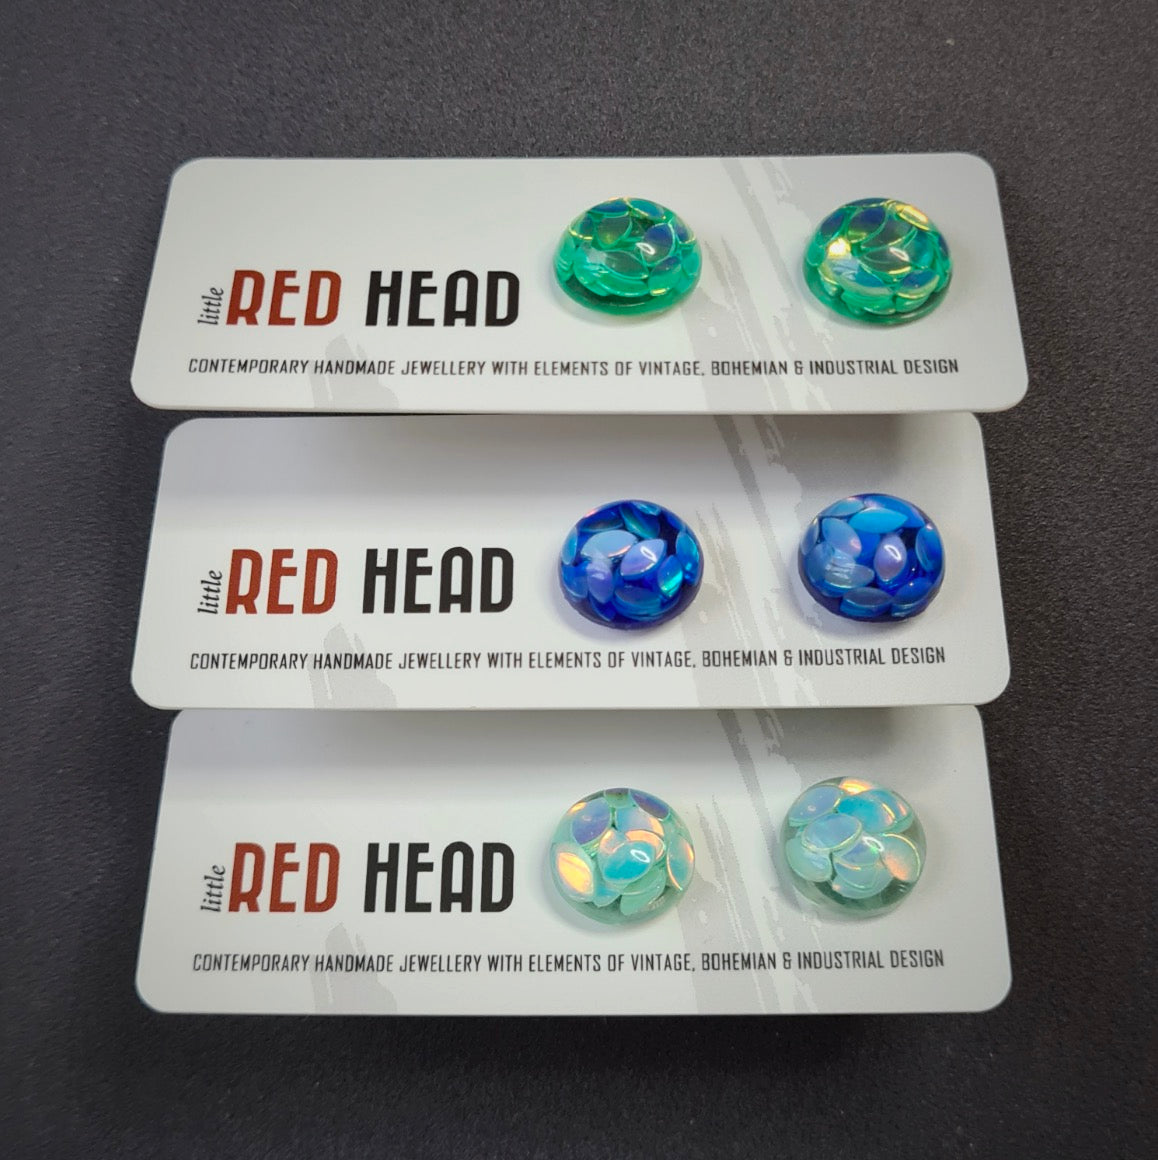 Resin Stud Earrings (Select from Green, Blue or Pastel Mint) by Little Red Head